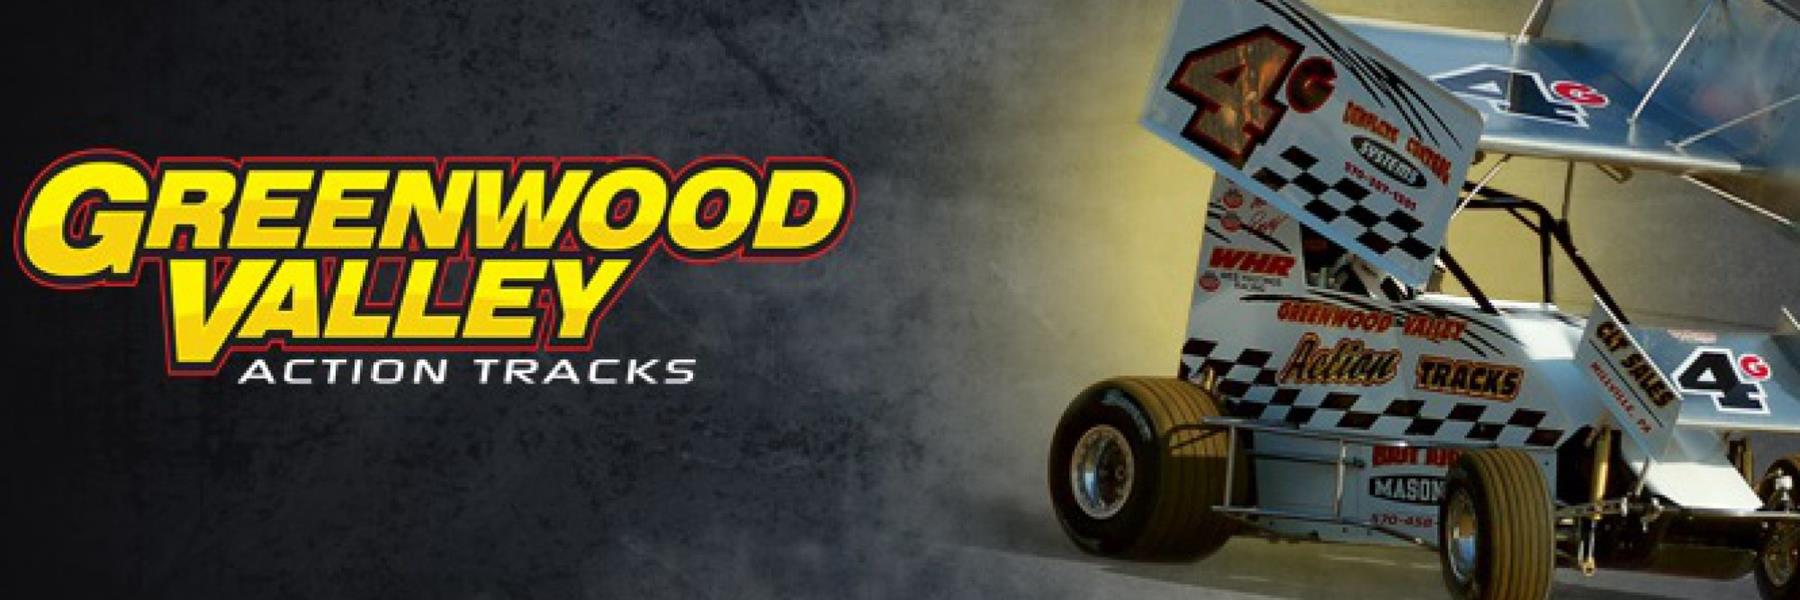 4/13/2019 - Greenwood Valley Action Track